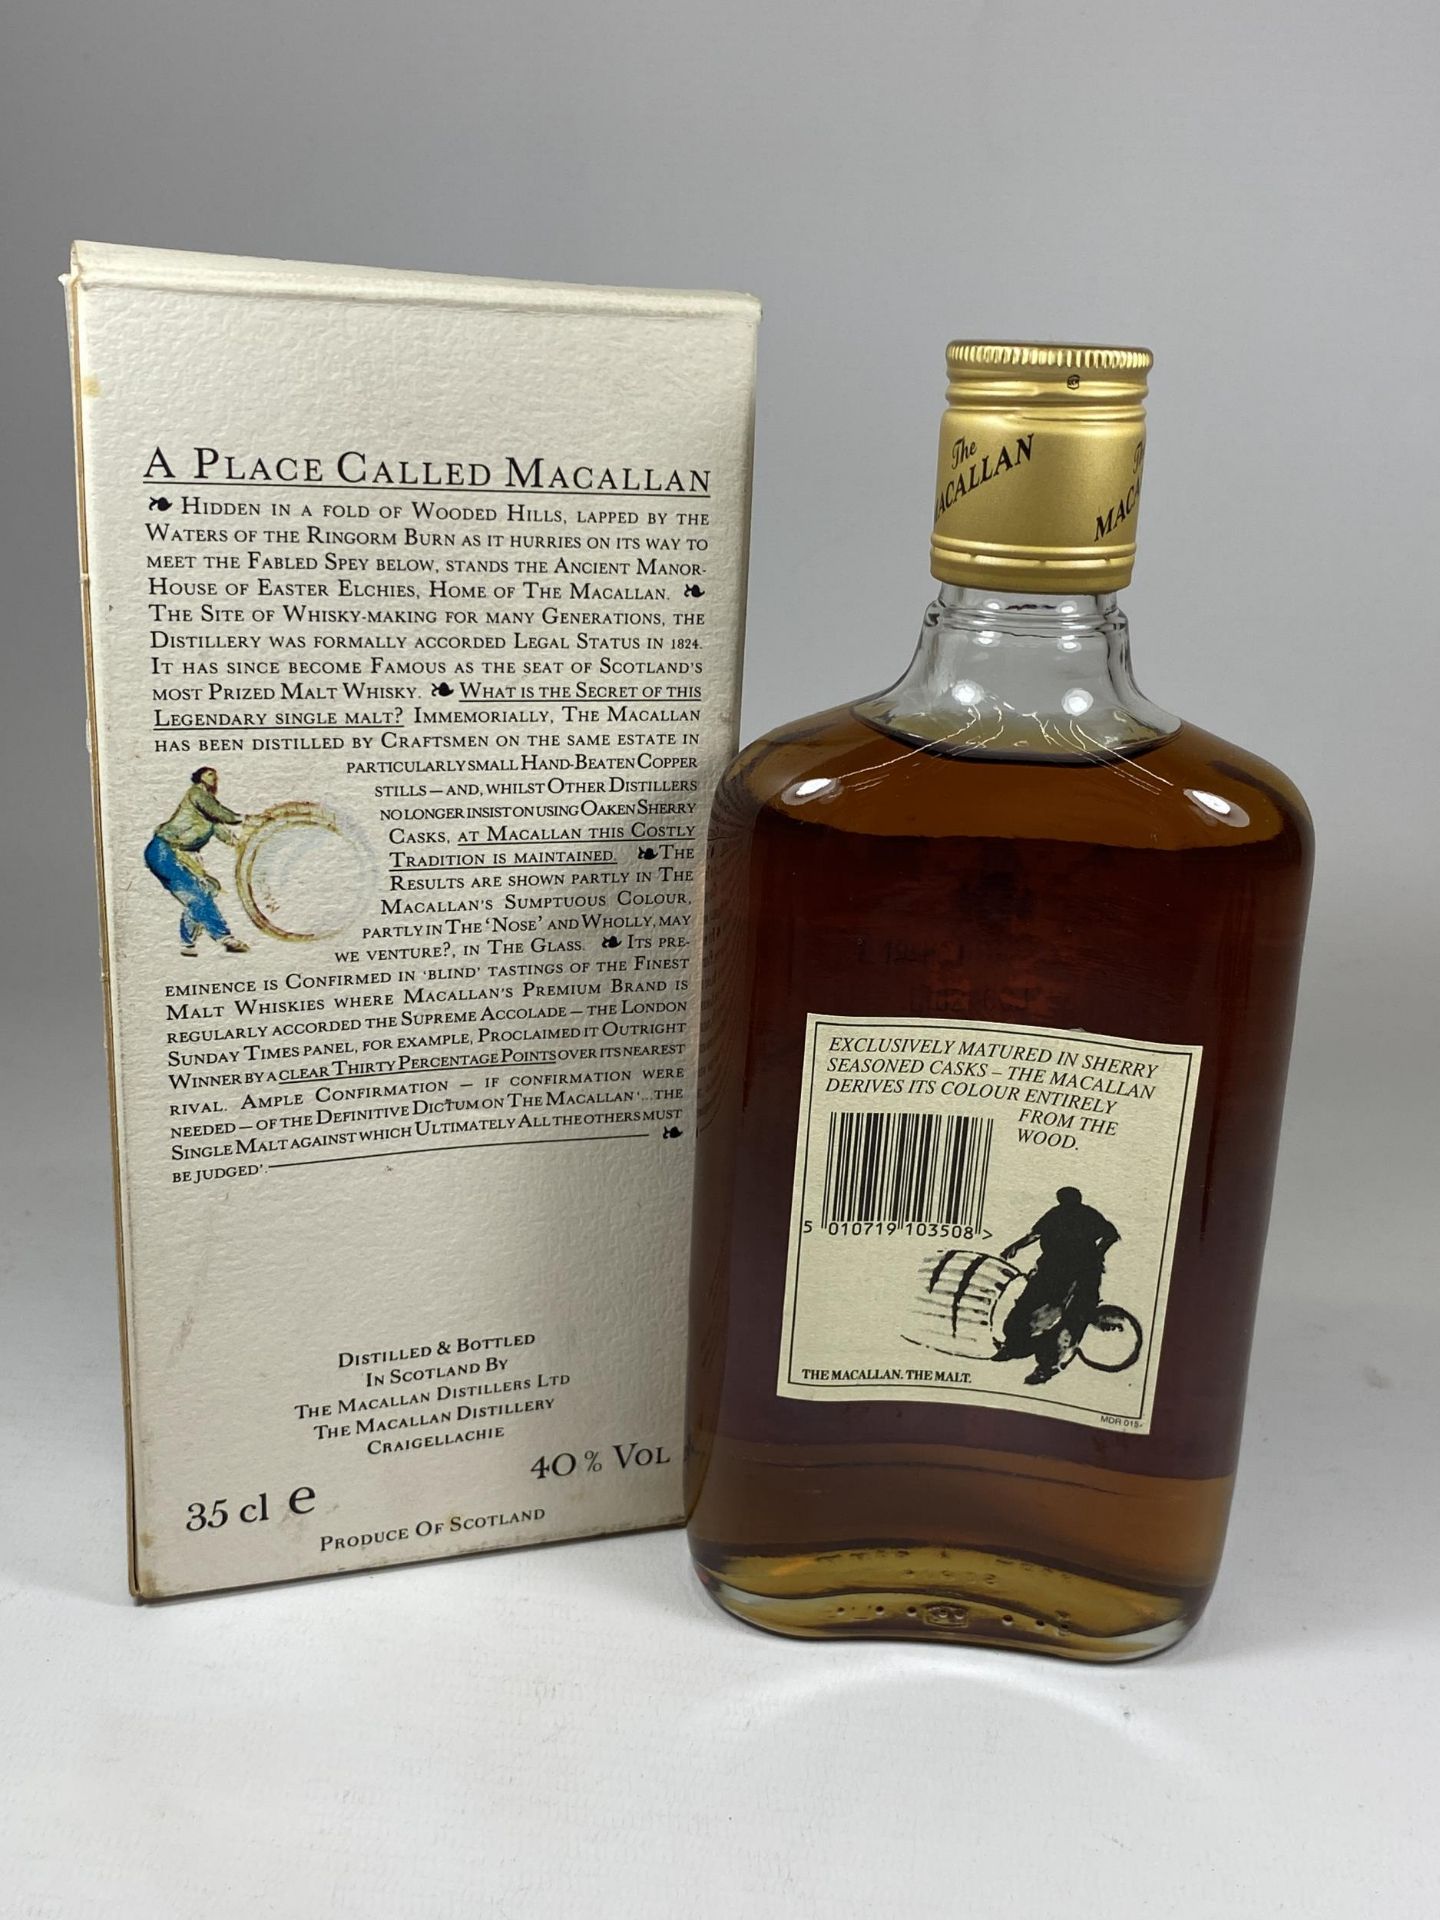 1 X BOXED 35CL BOTTLE - A RARE 1980'S MACALLAN 10 YEAR OLD SINGLE HIGHLAND MALT SCOTCH WHISKY - Image 3 of 3